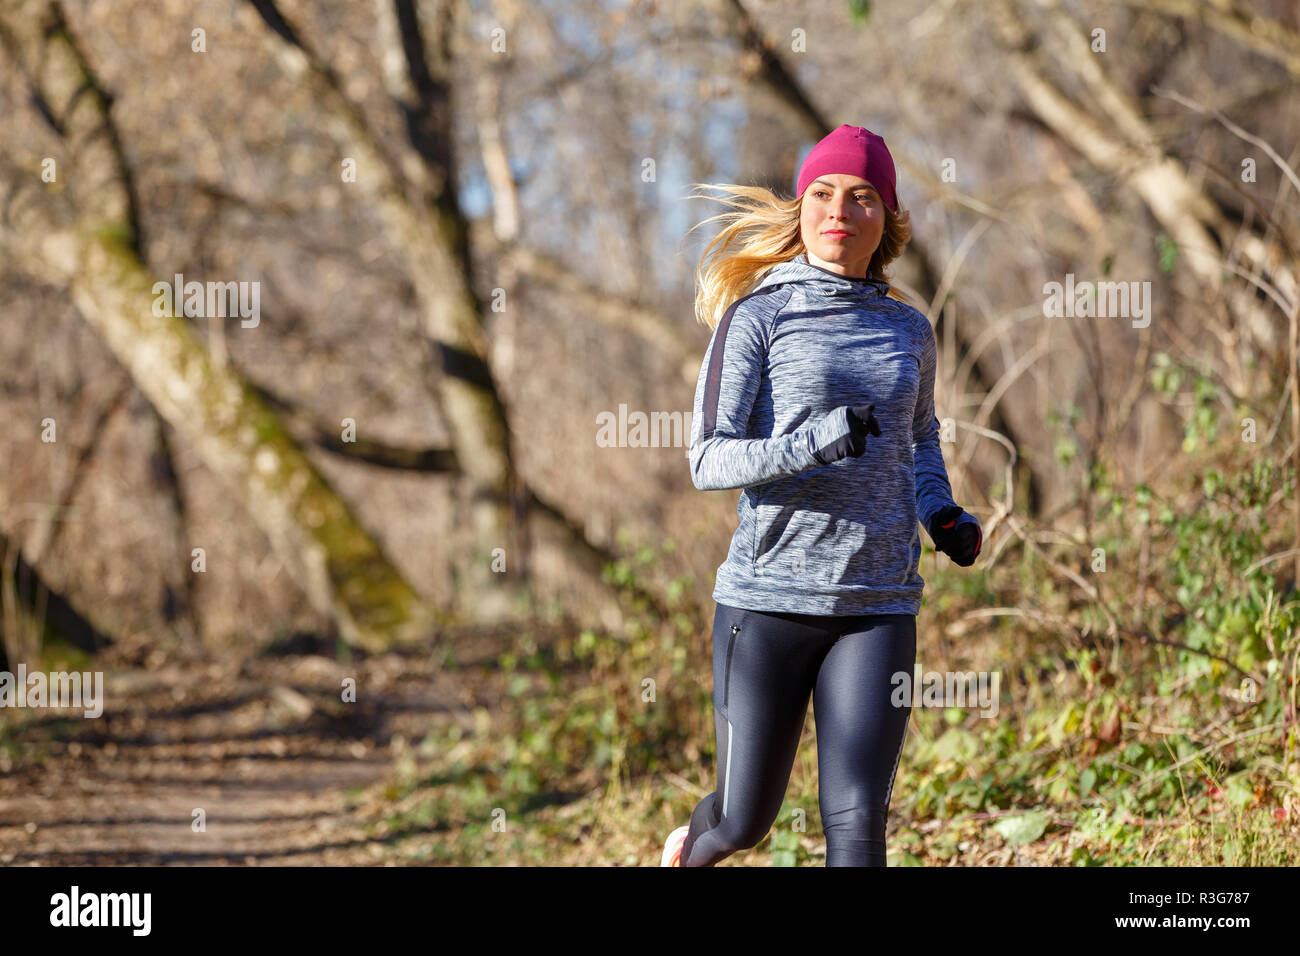 20s Attractive Female Runner Jogging On Stock Photo 1843506961